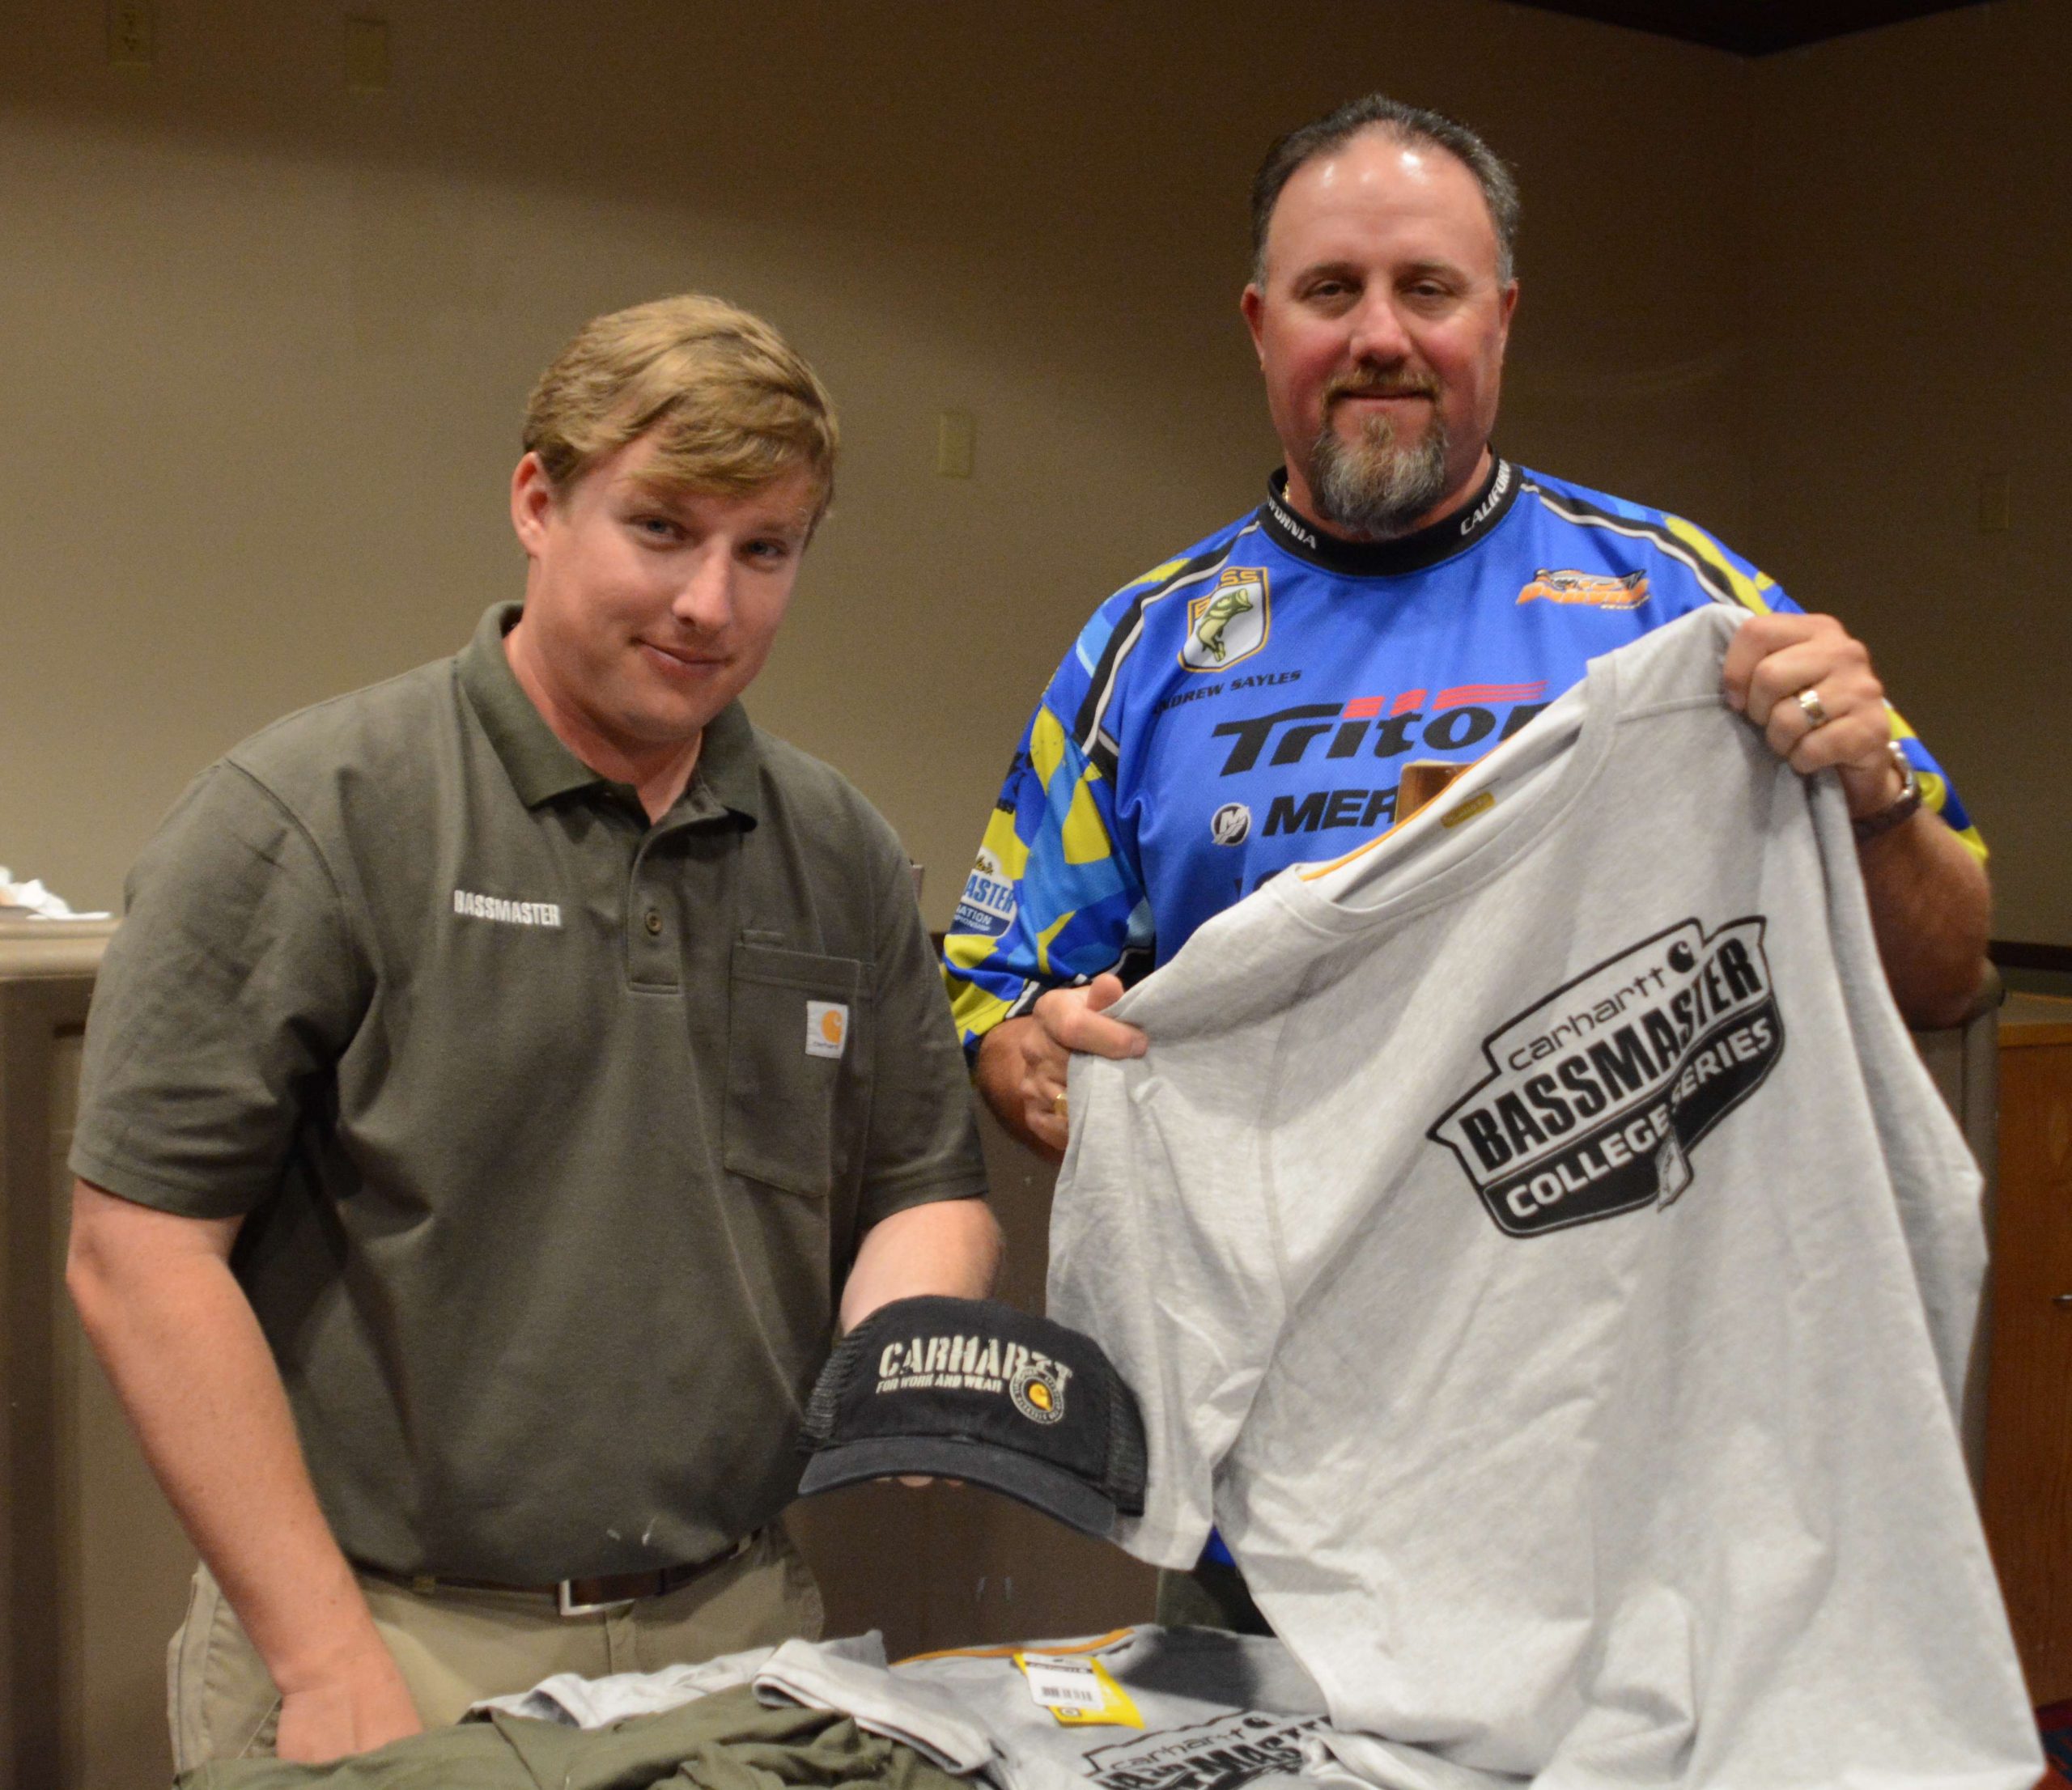 Hank Weldon of B.A.S.S. and Andrew Sayles of the California B.A.S.S. Nation are in charge of giving out sponsor products.